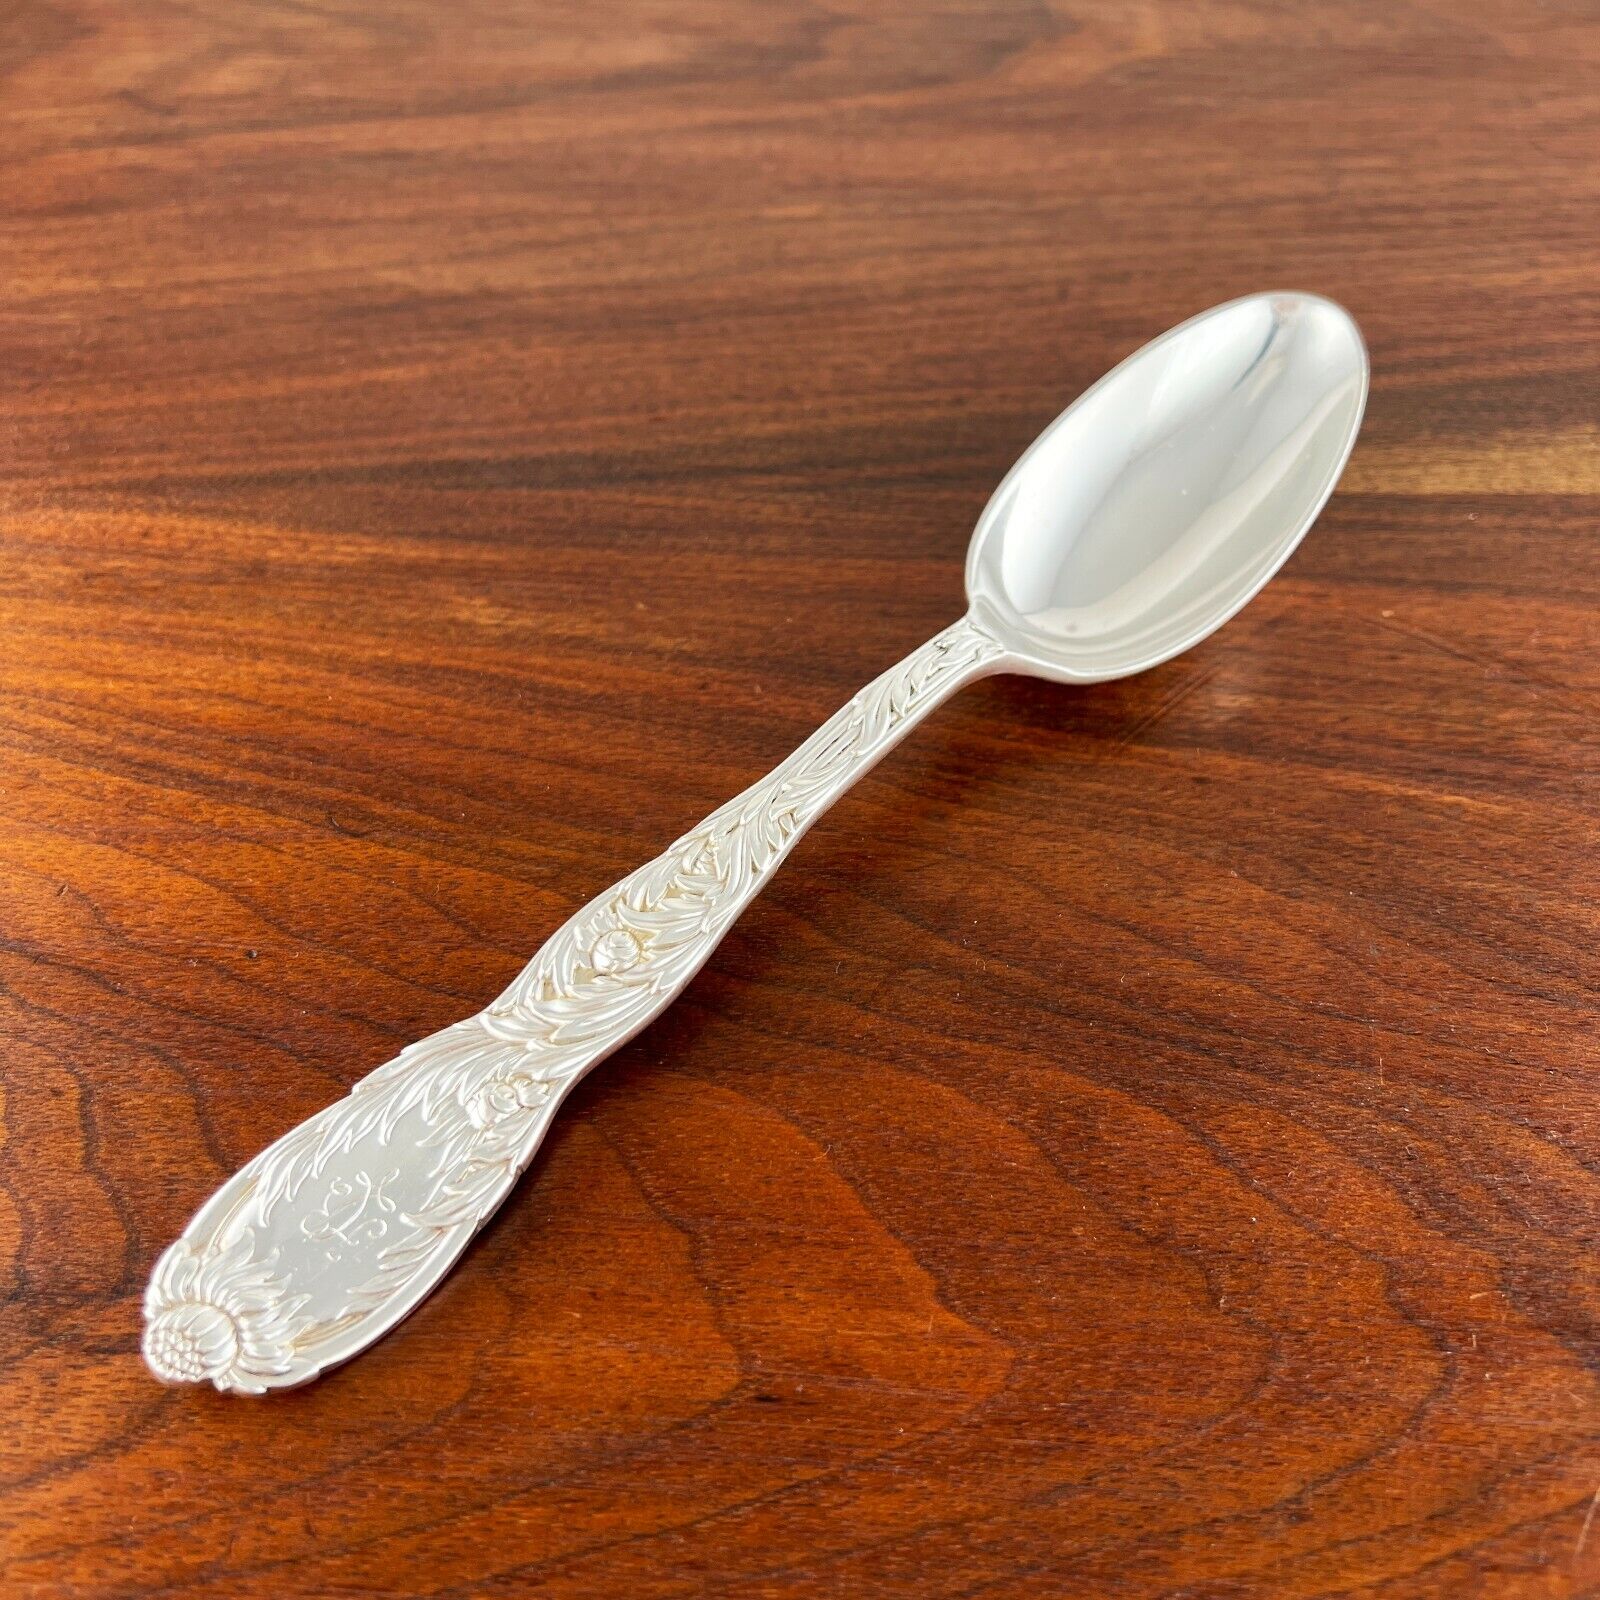 Antique Valuations: TIFFANY & CO AESTHETIC STERLING SILVER SERVING SPOON CHRYSANTHEMUM 1880 142G